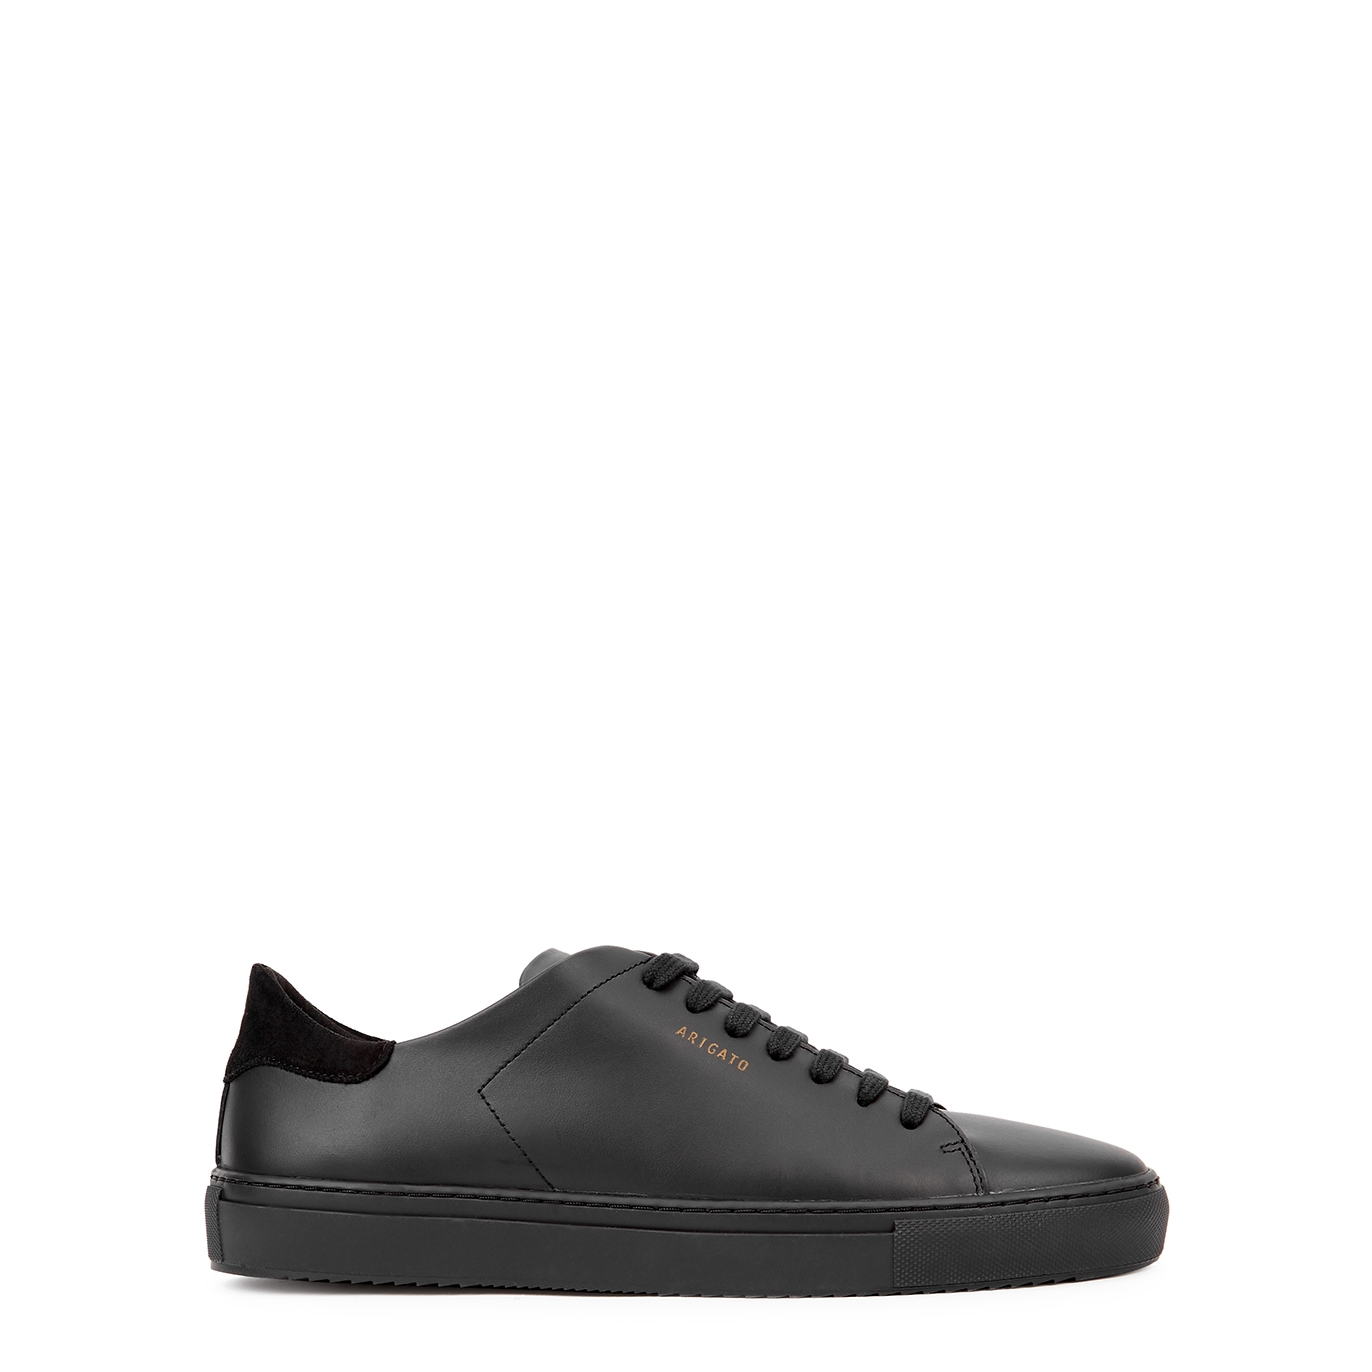 Axel Arigato Clean 90 Black Leather Sneakers - 6